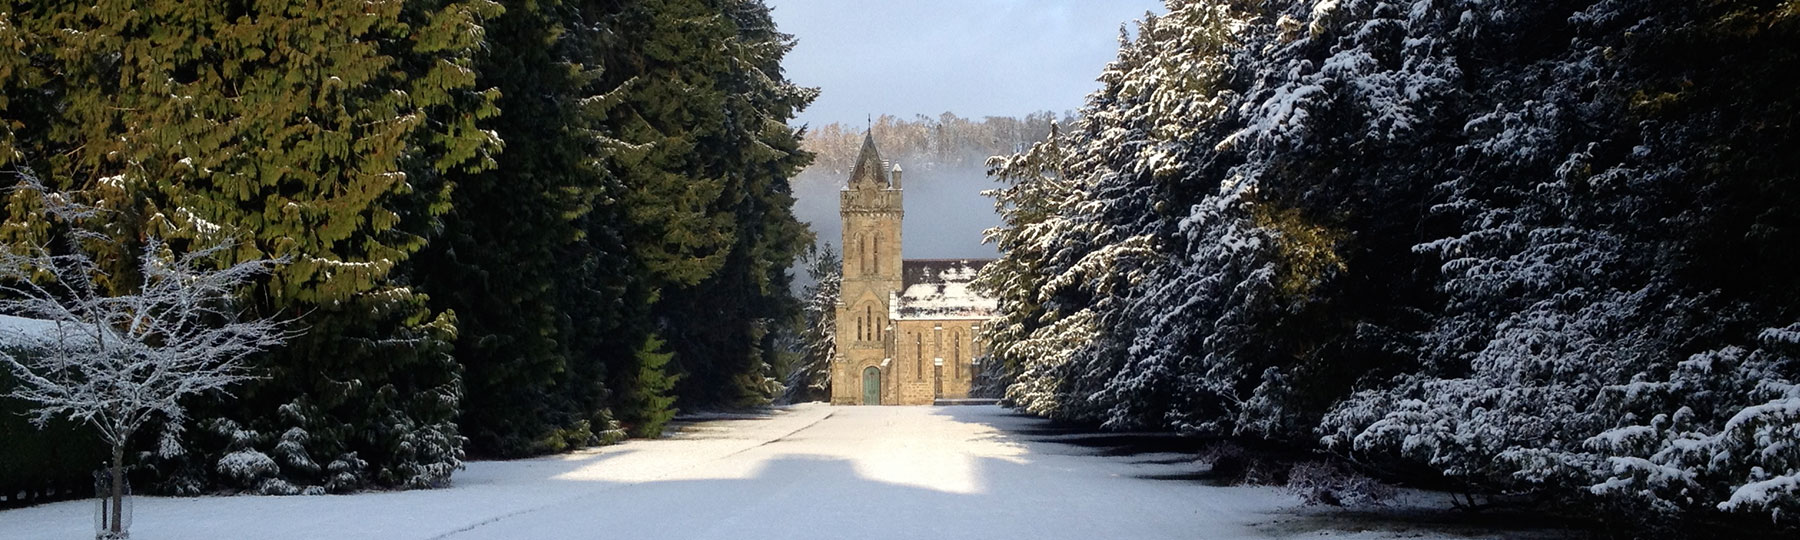 Murthly chapel dusted with snow on a winter morning